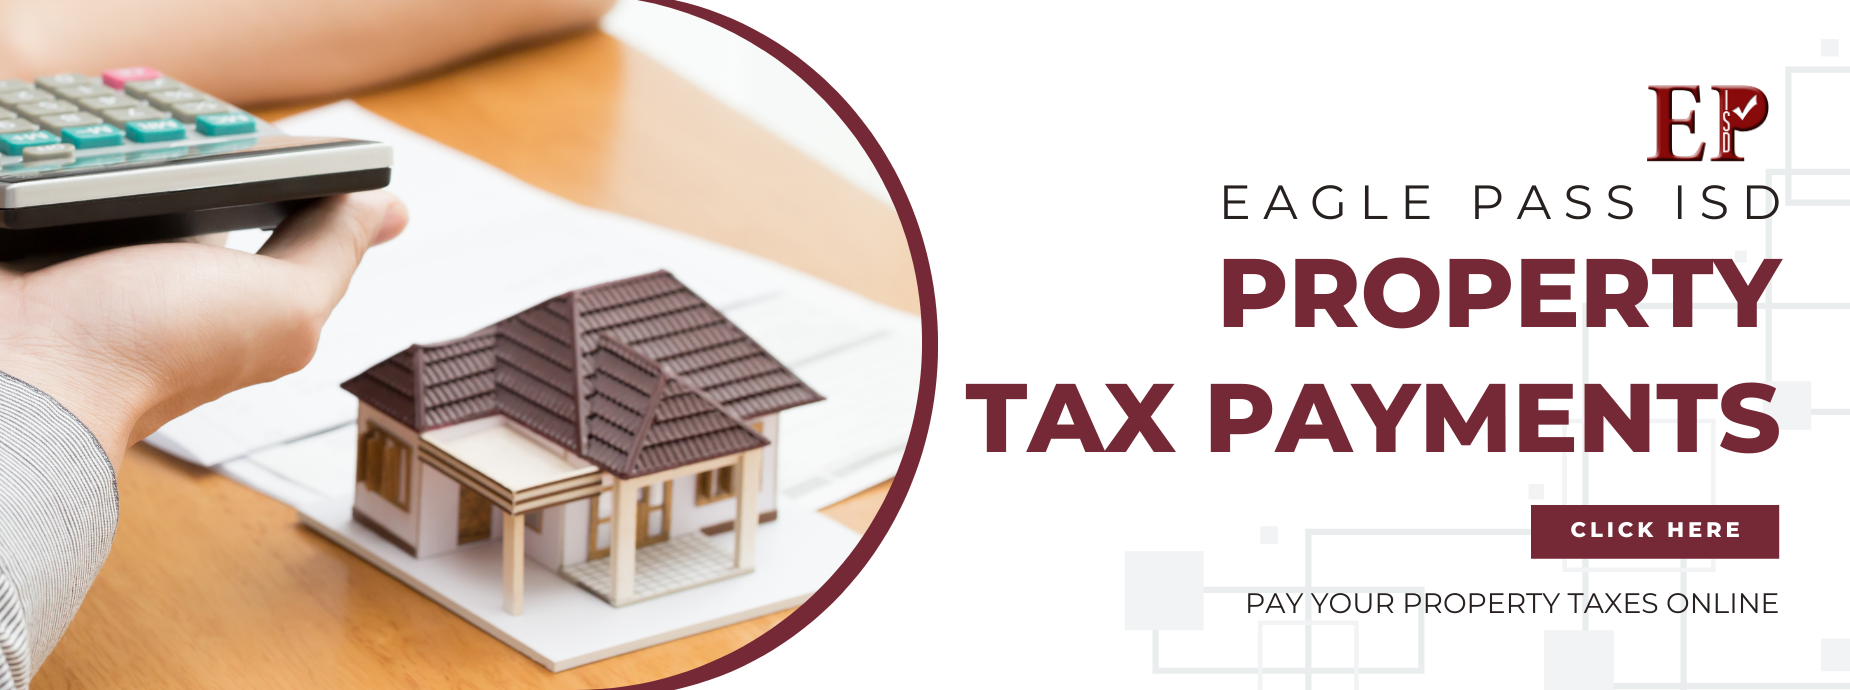 Property Tax Payments banner